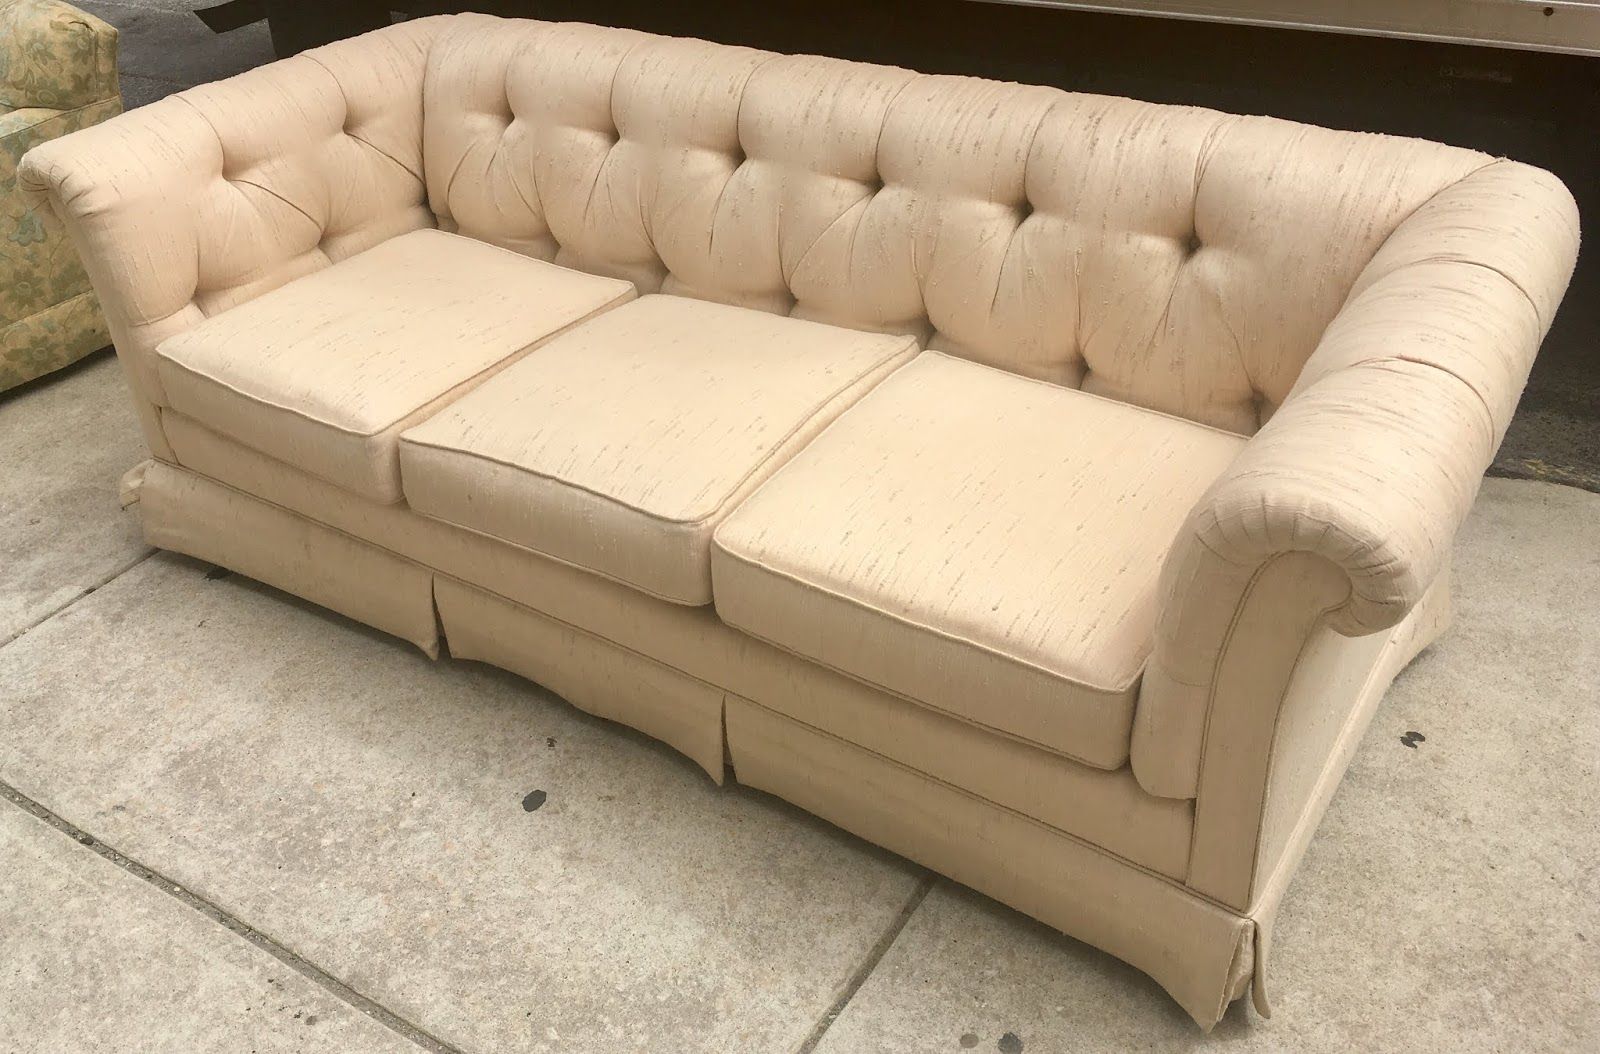 Uhuru Furniture & Collectibles: Beige Sofa With Tufted Backsherrill Pertaining To Ecru And Otter Console Tables (View 13 of 20)